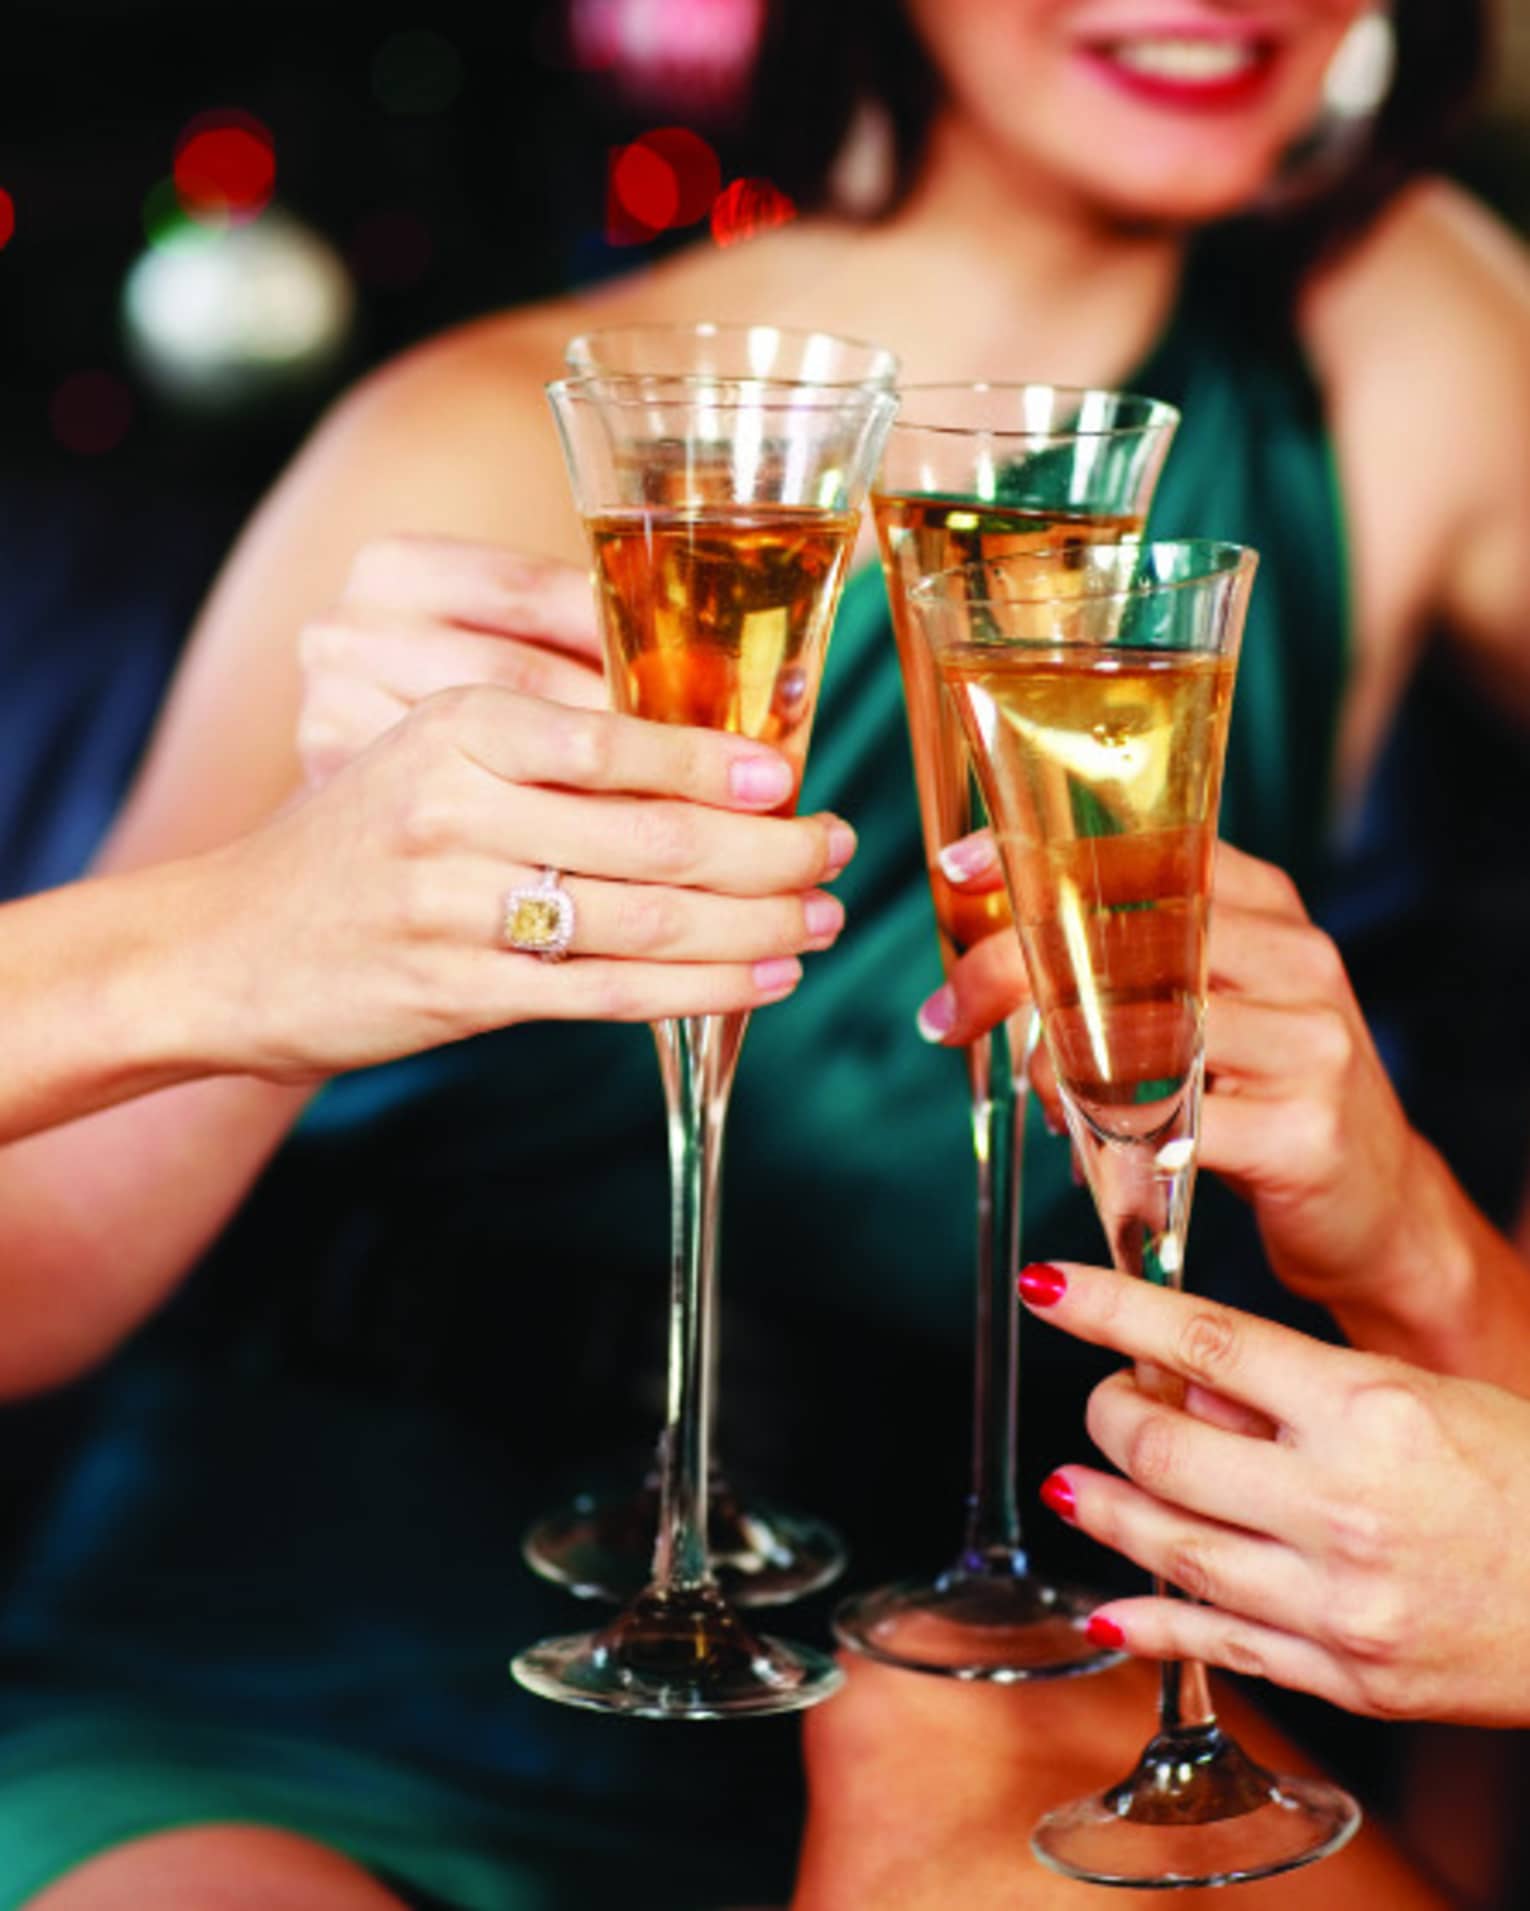 Close-up of women in evening gowns toasting with glasses of Champagne